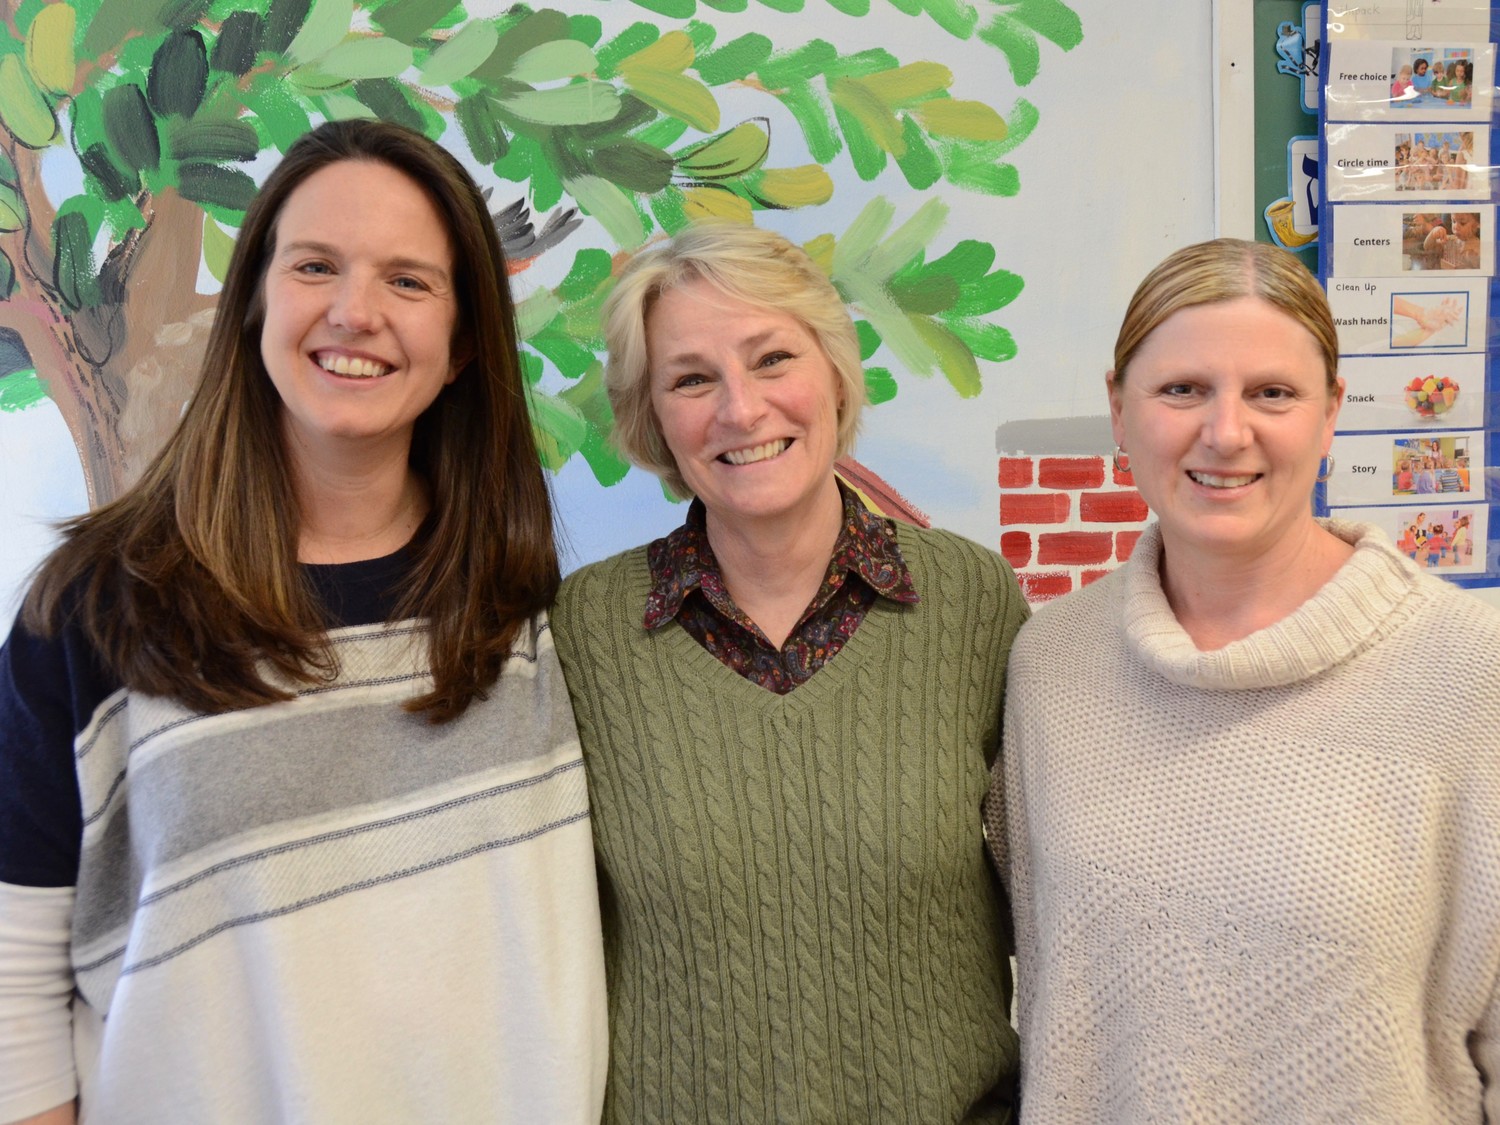 Shirley Perri, center, director of St. Mark’s Nursery School, retired earlier this year. Michelle Creegan, left, and Alicia Todaro have replaced her as co-directors.